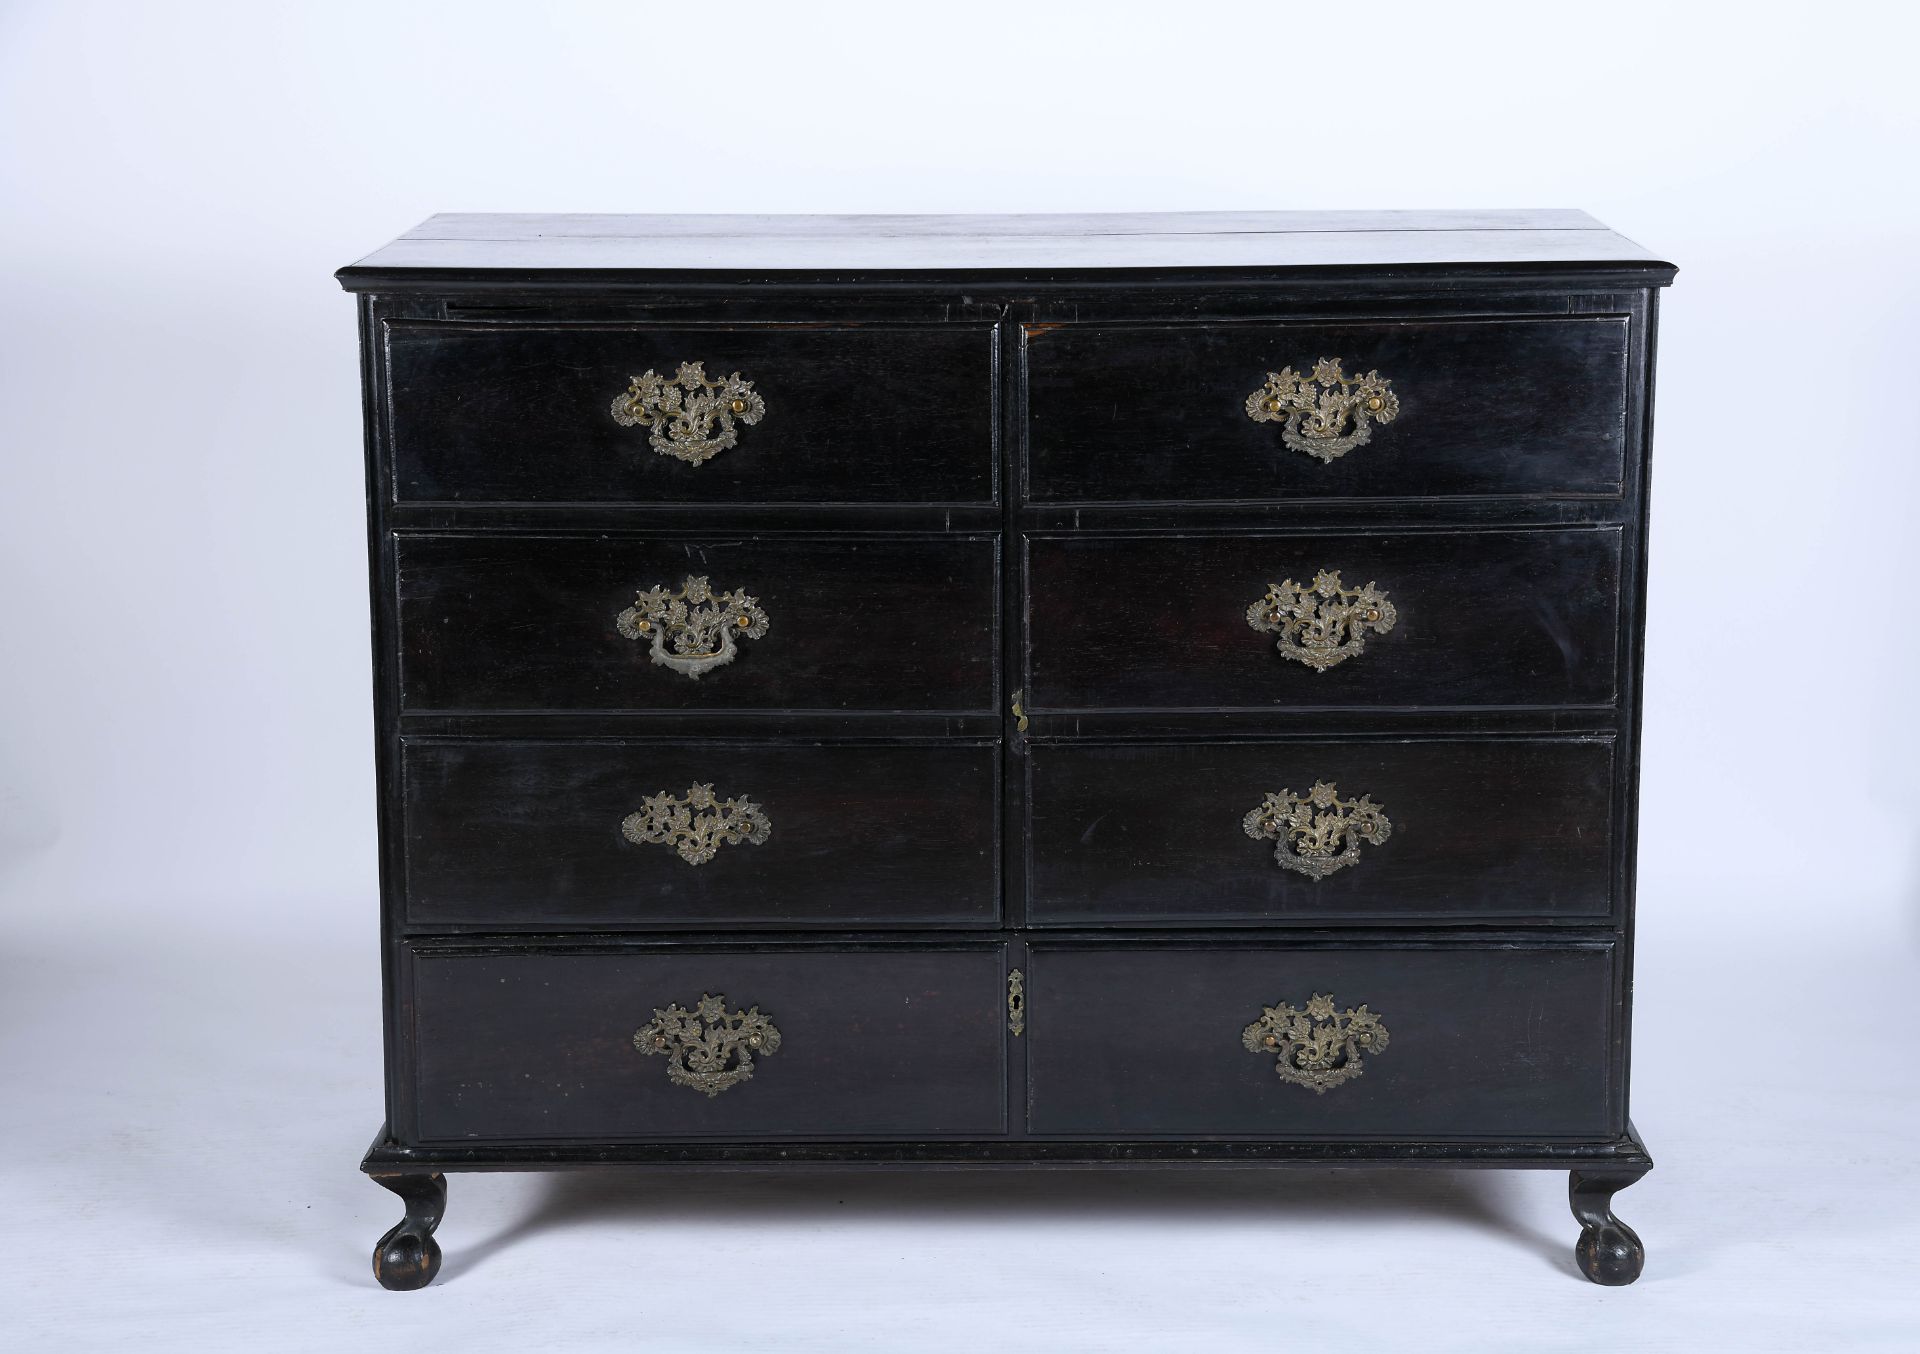 A large chest with drawer and two doors, simulating eight drawers